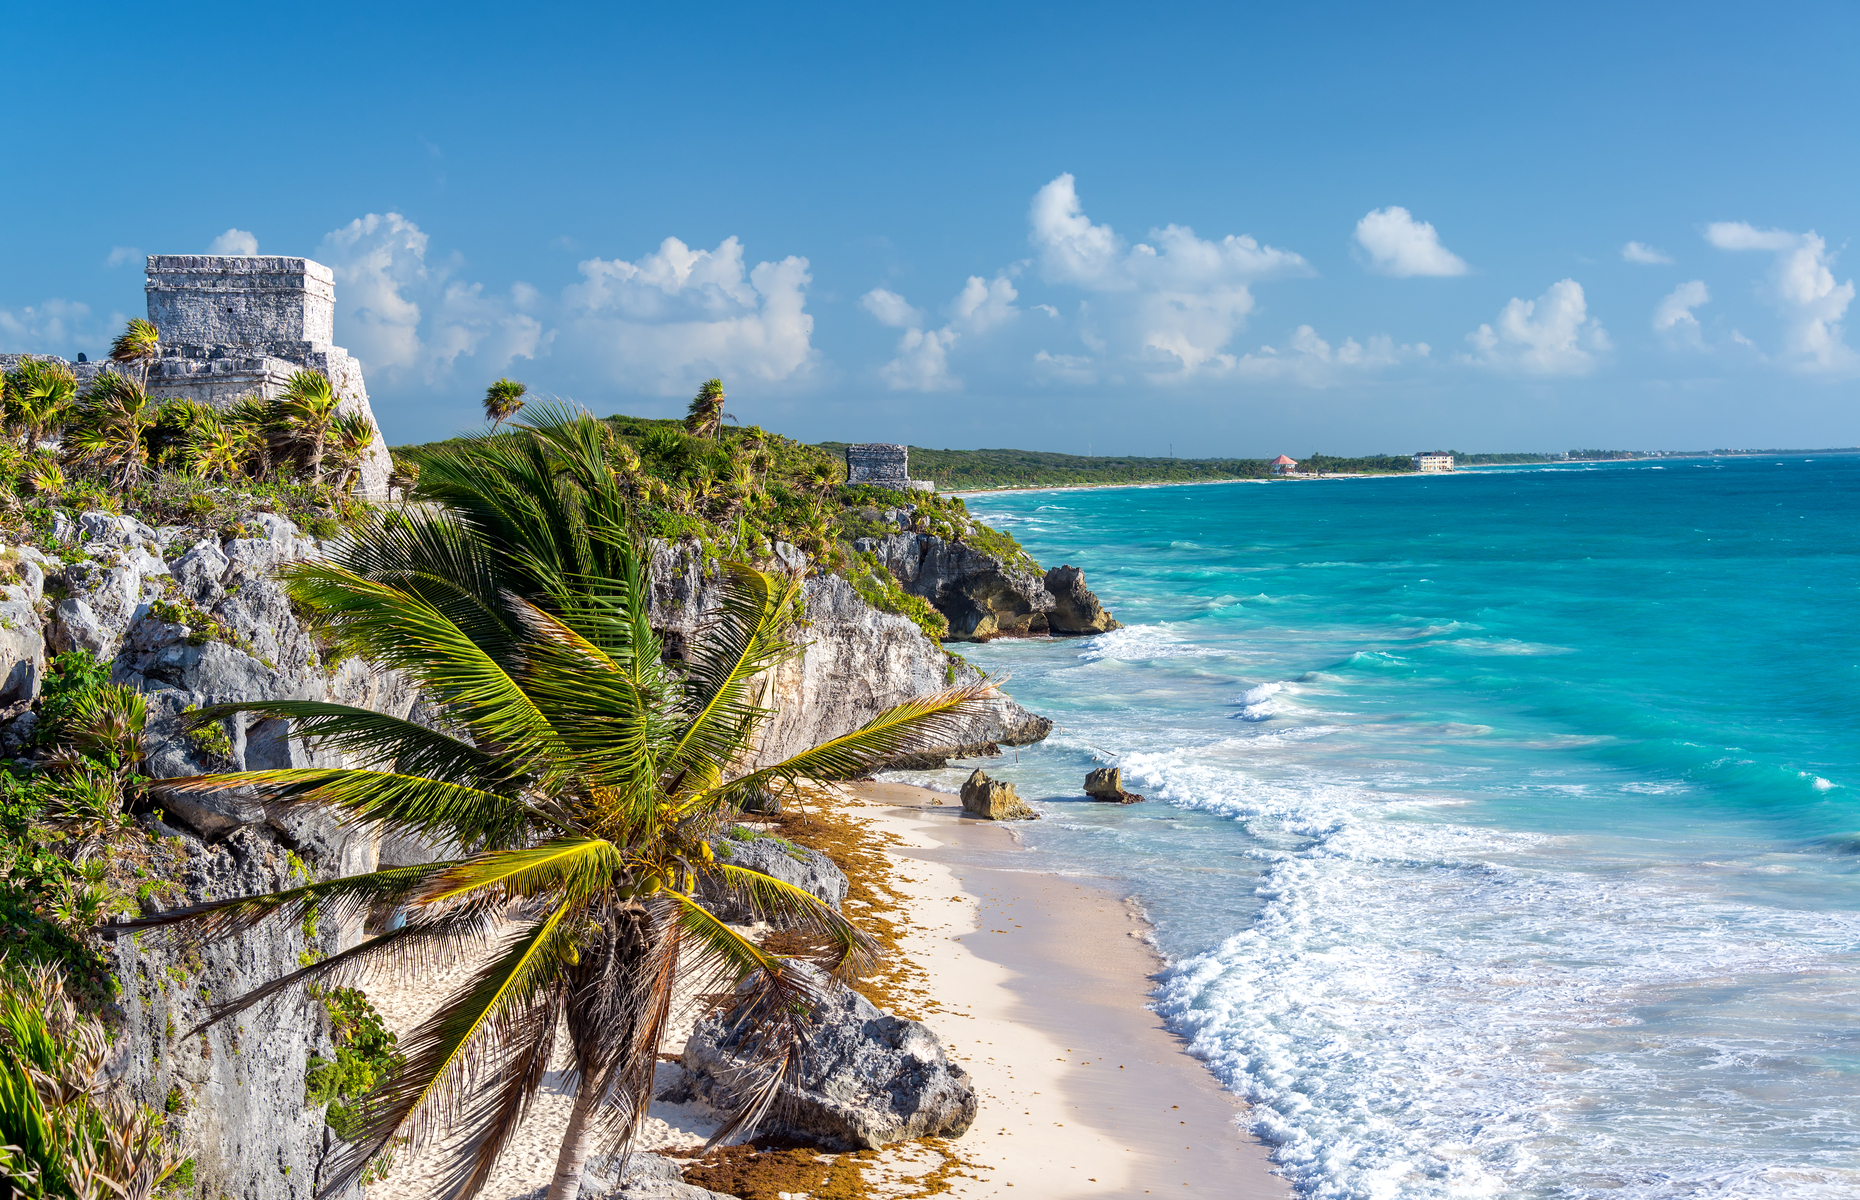 <p>Attracting thousands of vacationers each year, <a href="https://ca.hotels.com/go/mexico/best-beaches-tulum" rel="noreferrer noopener">Tulum’s popular beaches</a> are as much appreciated for their tropical landscape as for their historical location. Located at the foot of an archaeological site of Maya ruins, Tulum is perfect for enjoying several activities in a single day.</p>